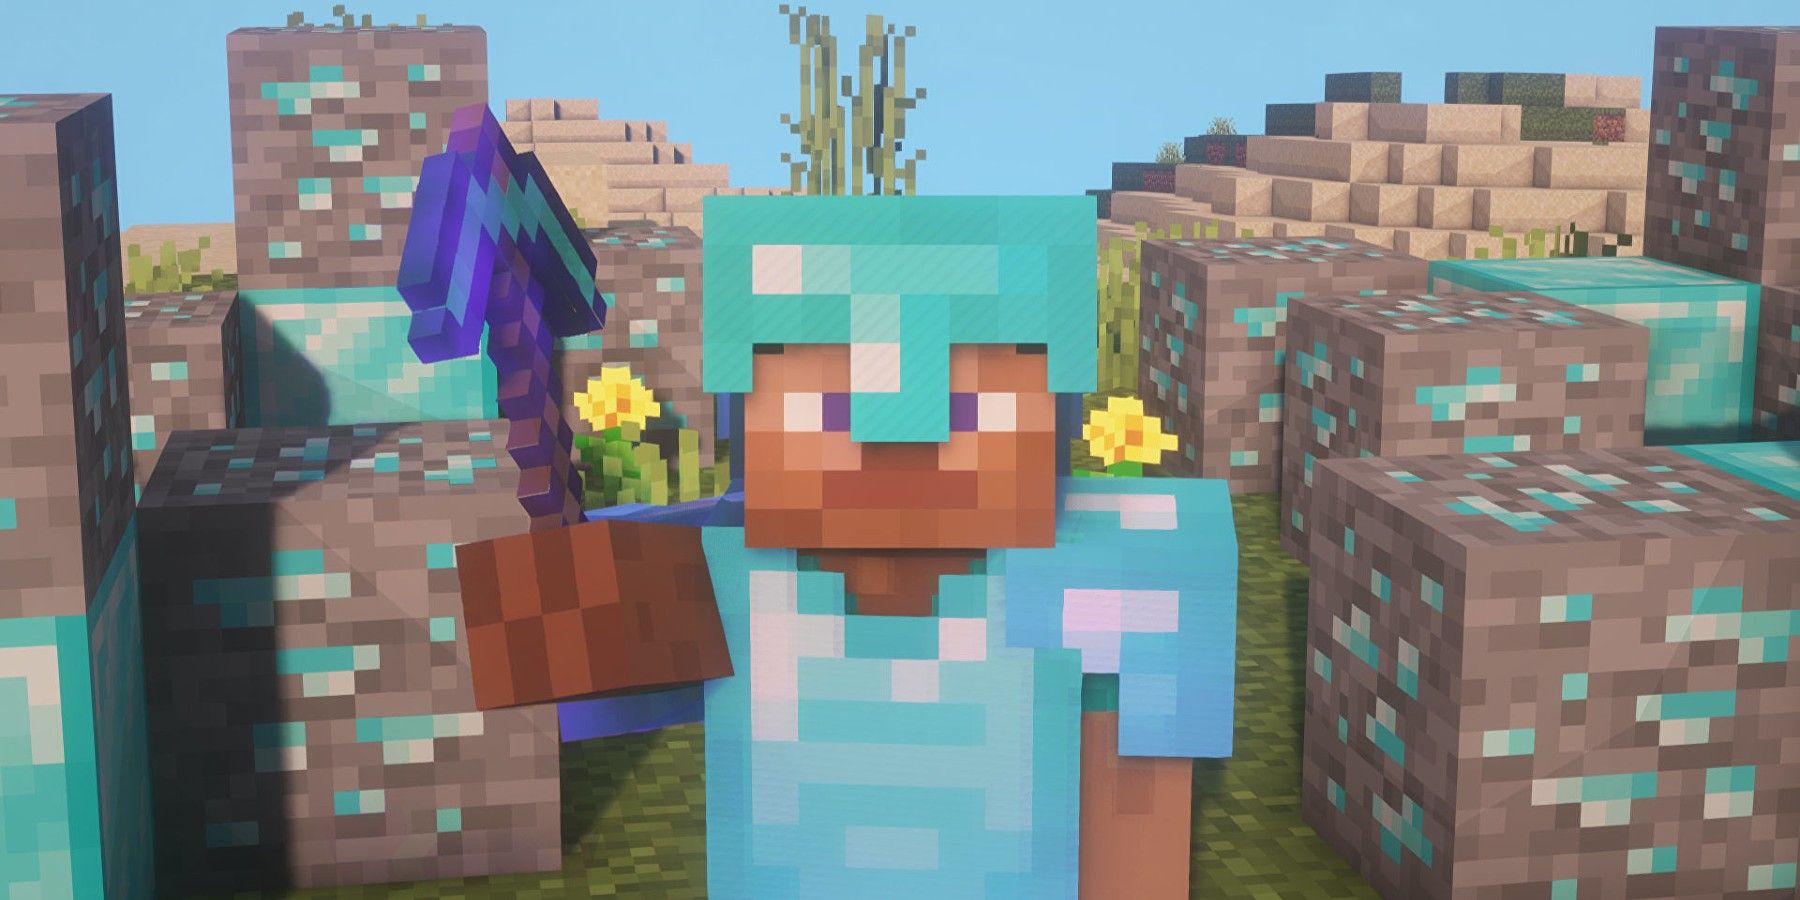 Minecraft Players Have Been Making Some Impressive Creations This Week